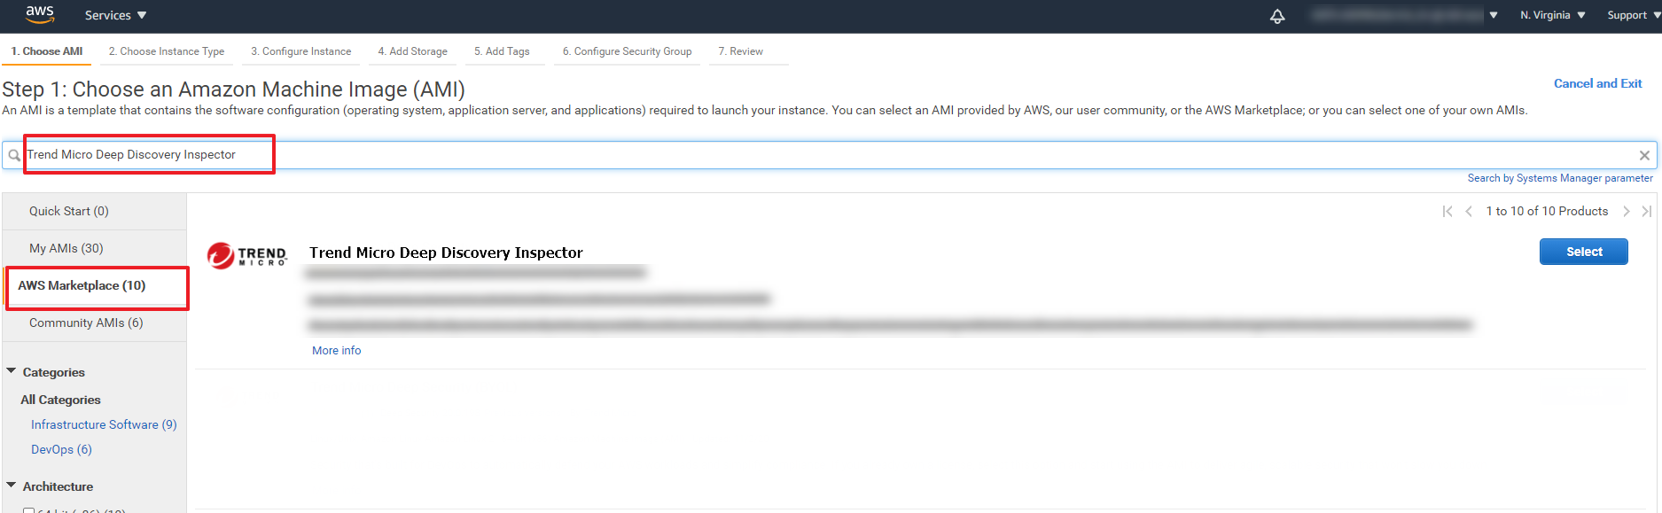 aws_marketplace=GUID-48CEC453-F116-421E-9FF3-BD7FE8B08D5E=1=ja-jp=Low.png